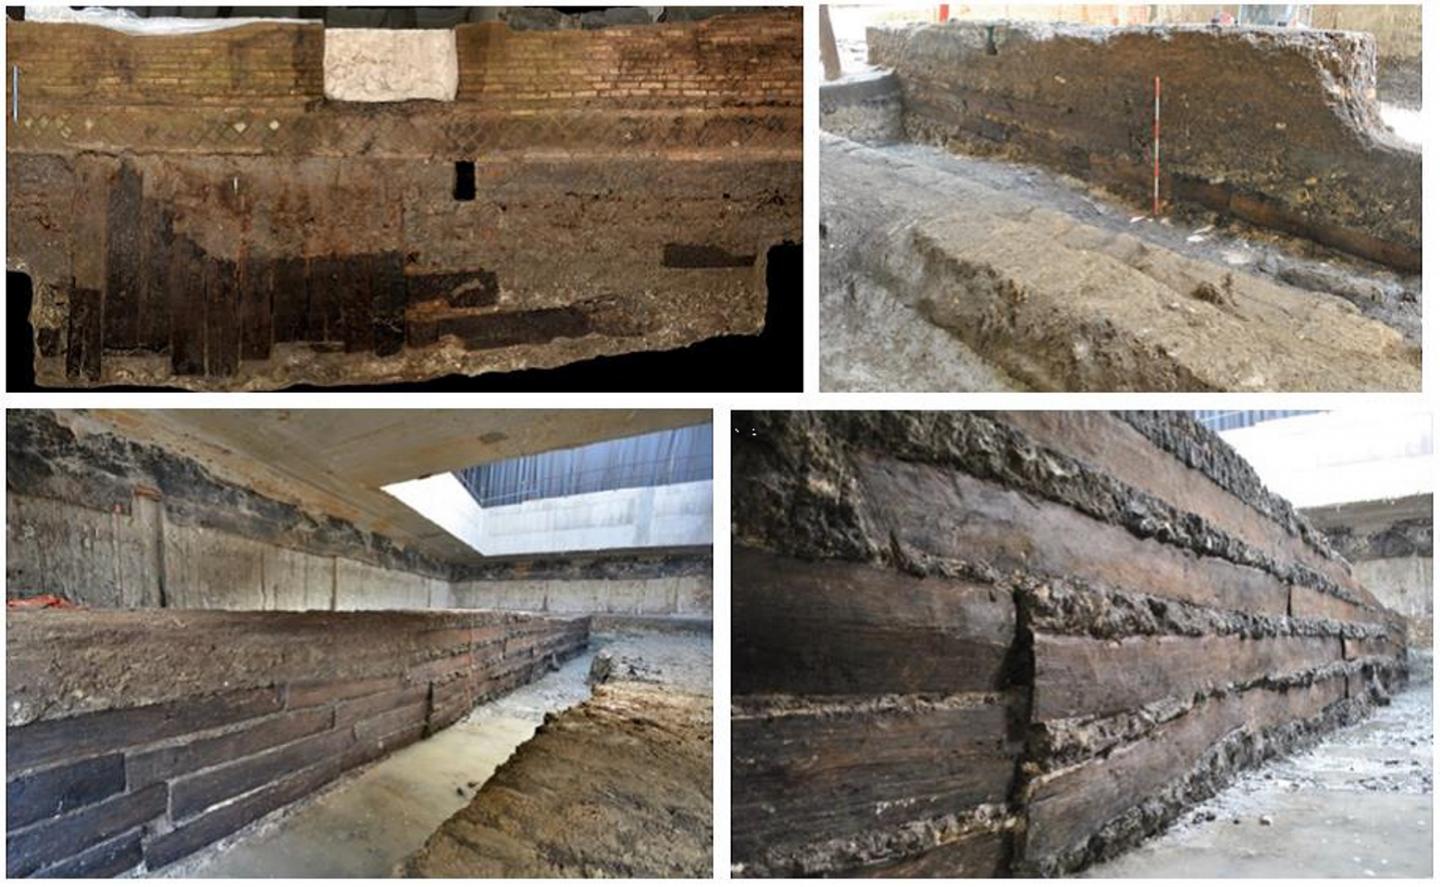 Long-Distance Timber Trade Underpinned the Roman Empire's Construction